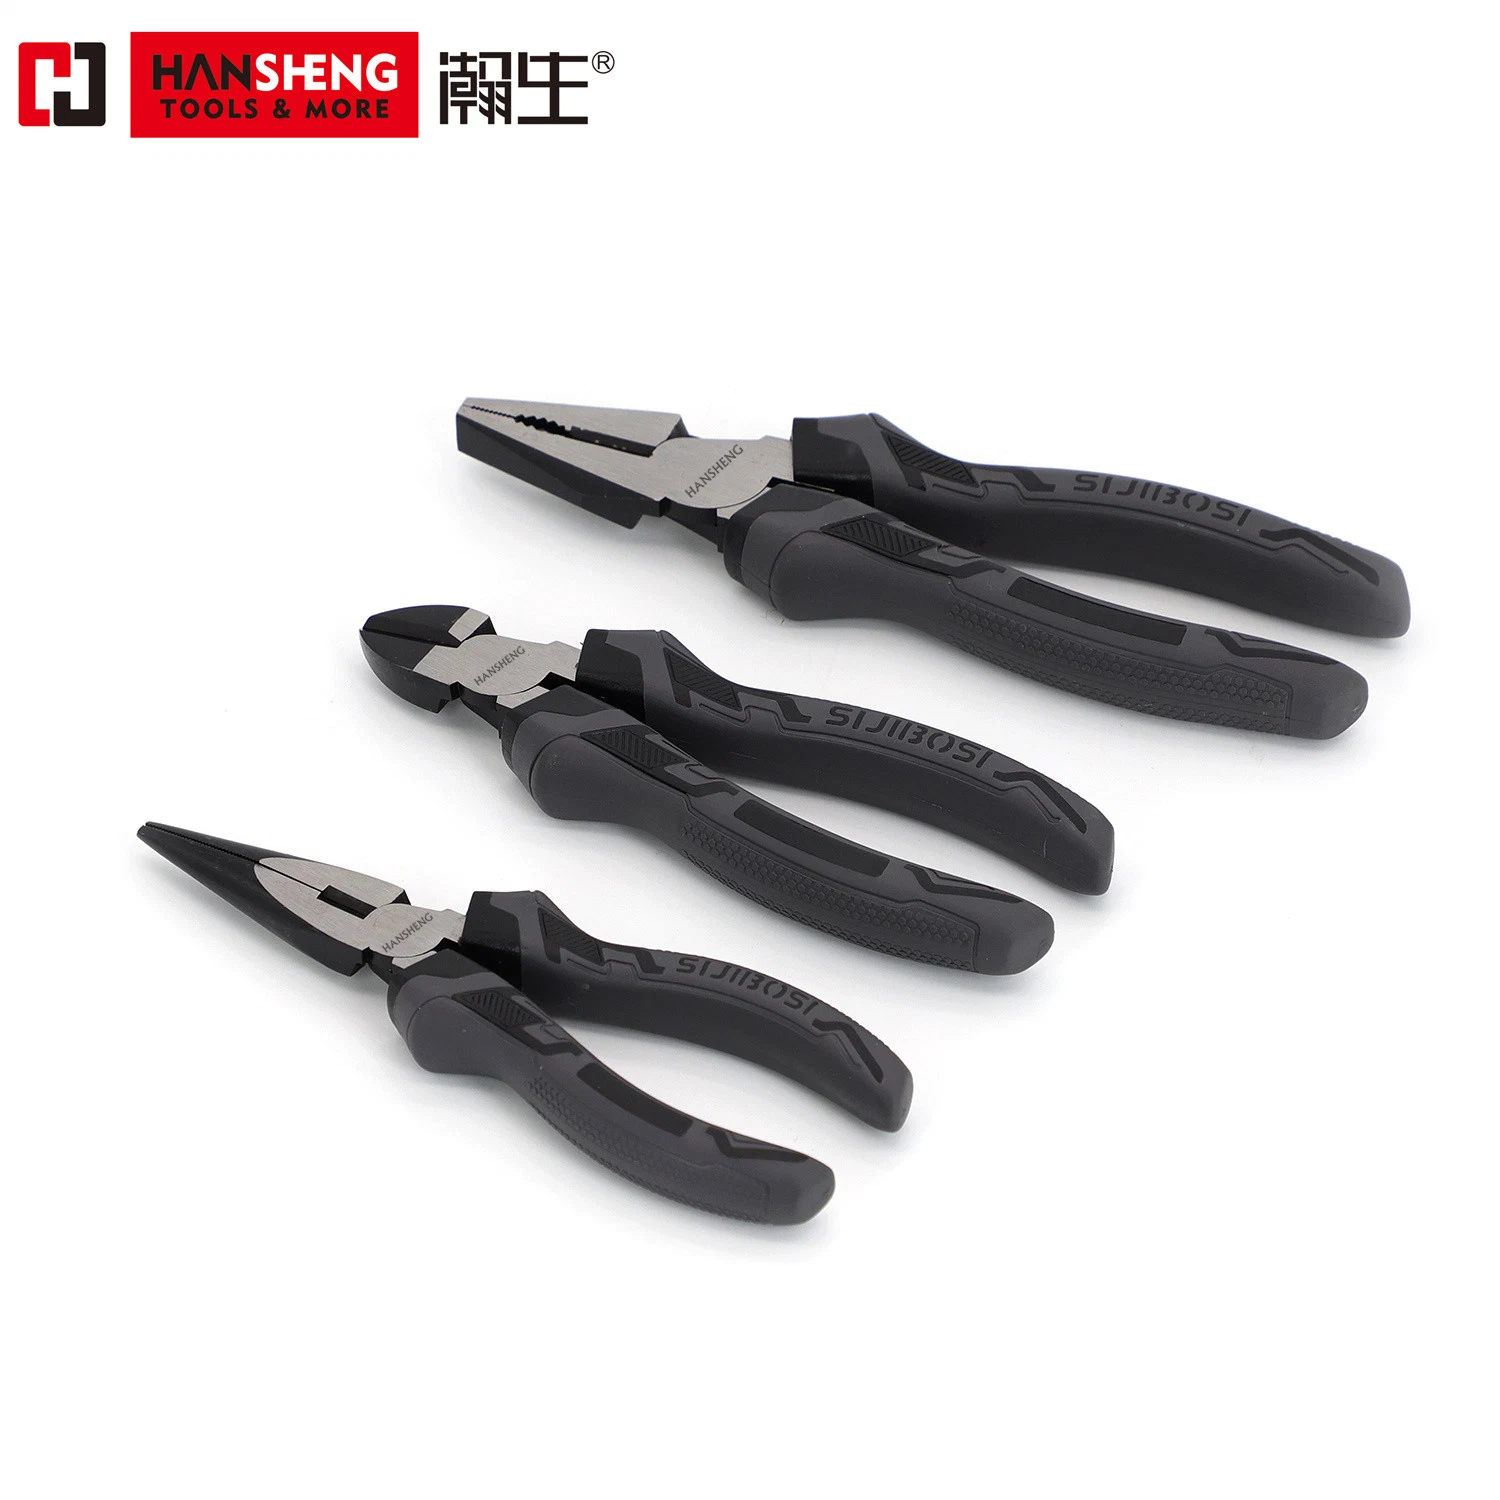 Hardware 6" 7" 8" CRV Pliers Combination Pliers Cutting Hand Tools